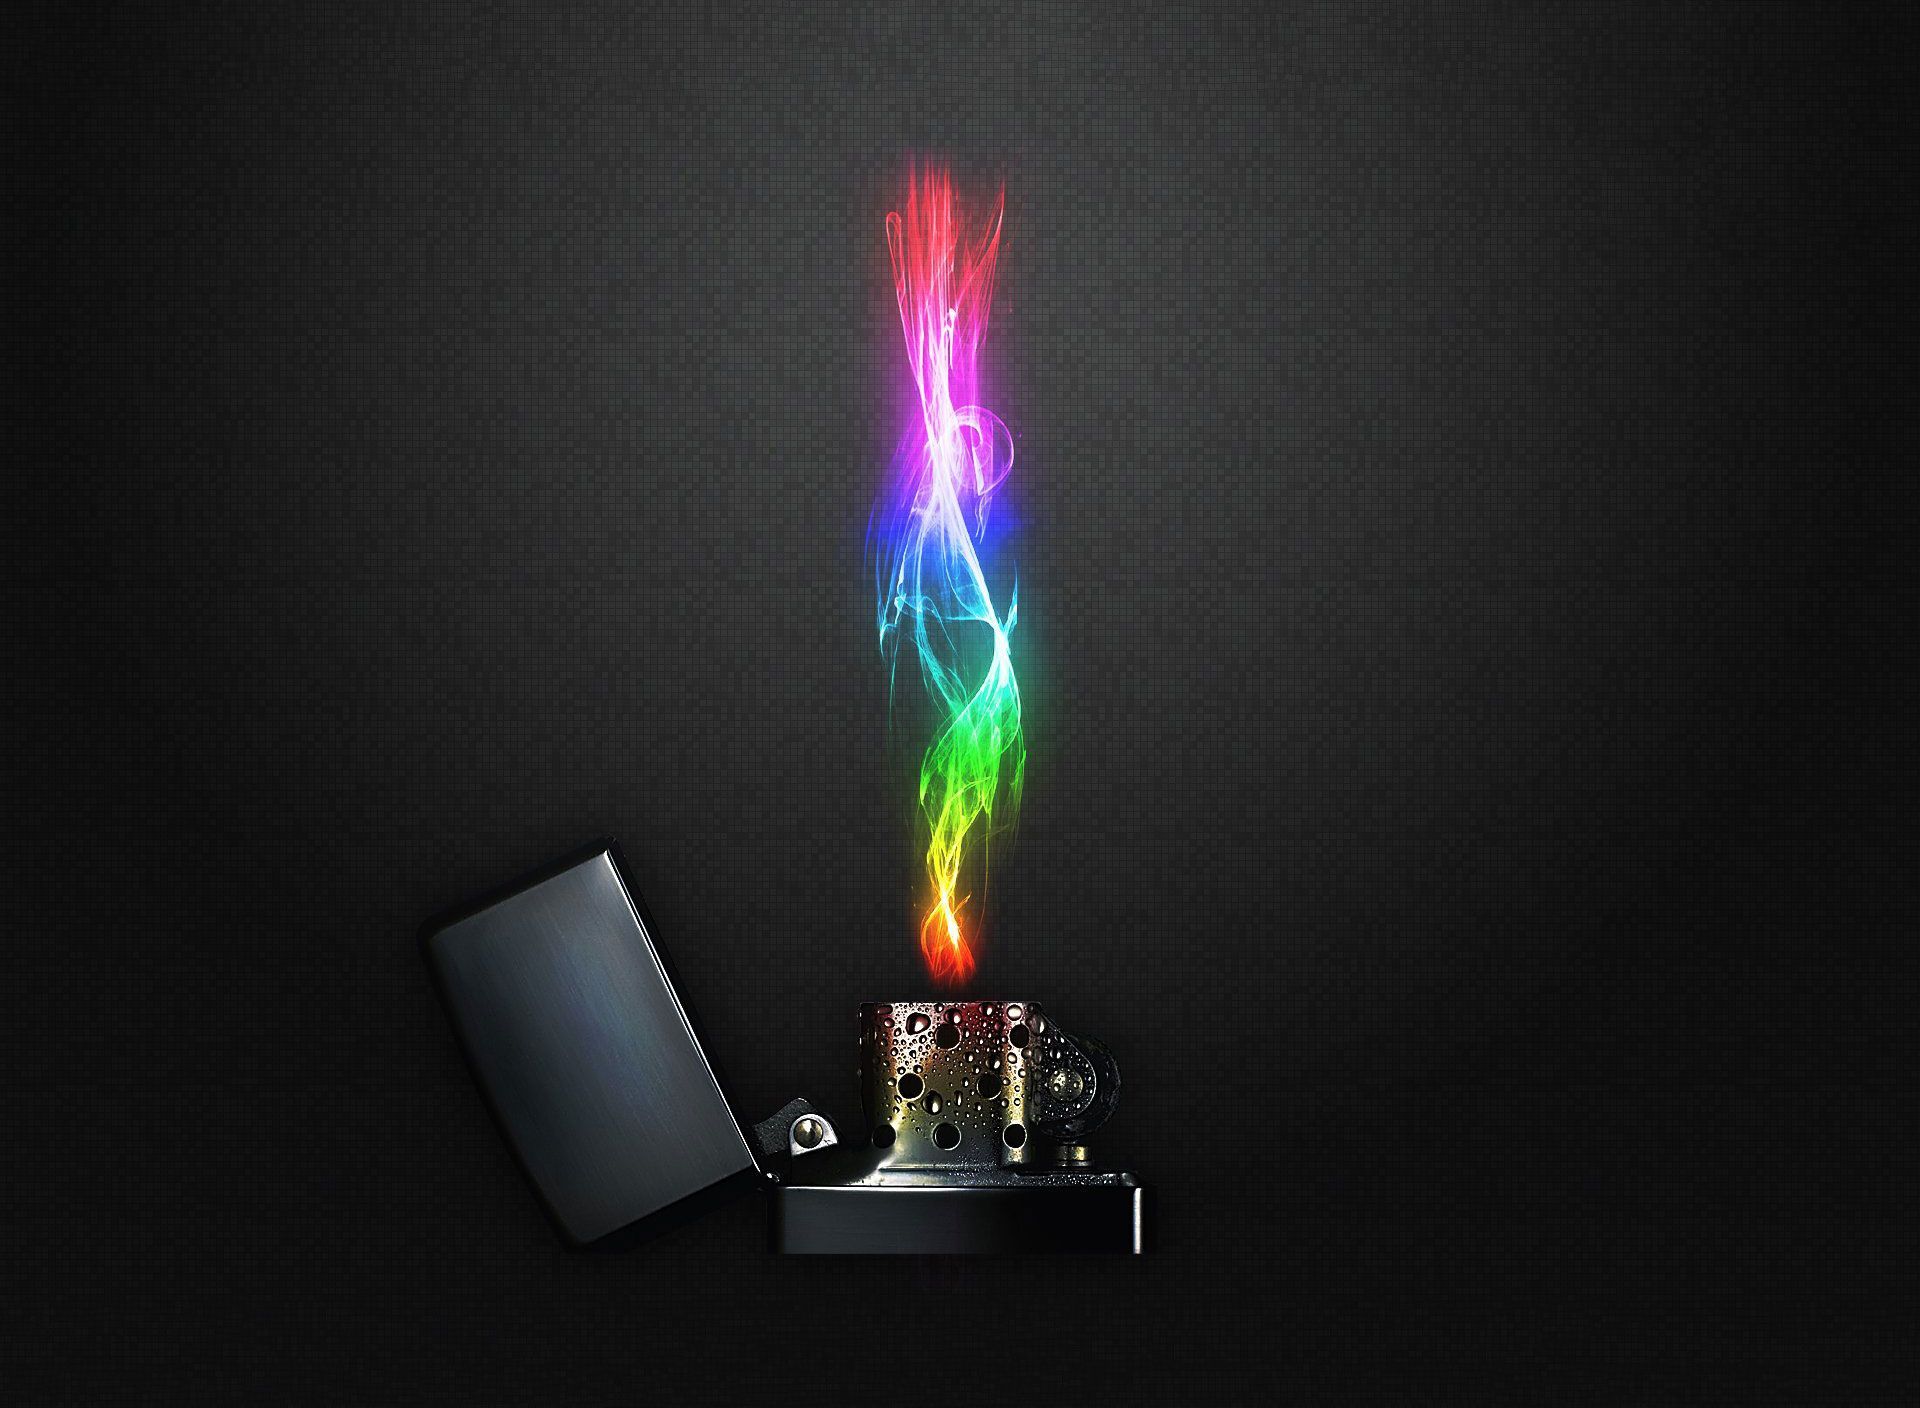 Rainbow Fire wallpapers & backgrounds